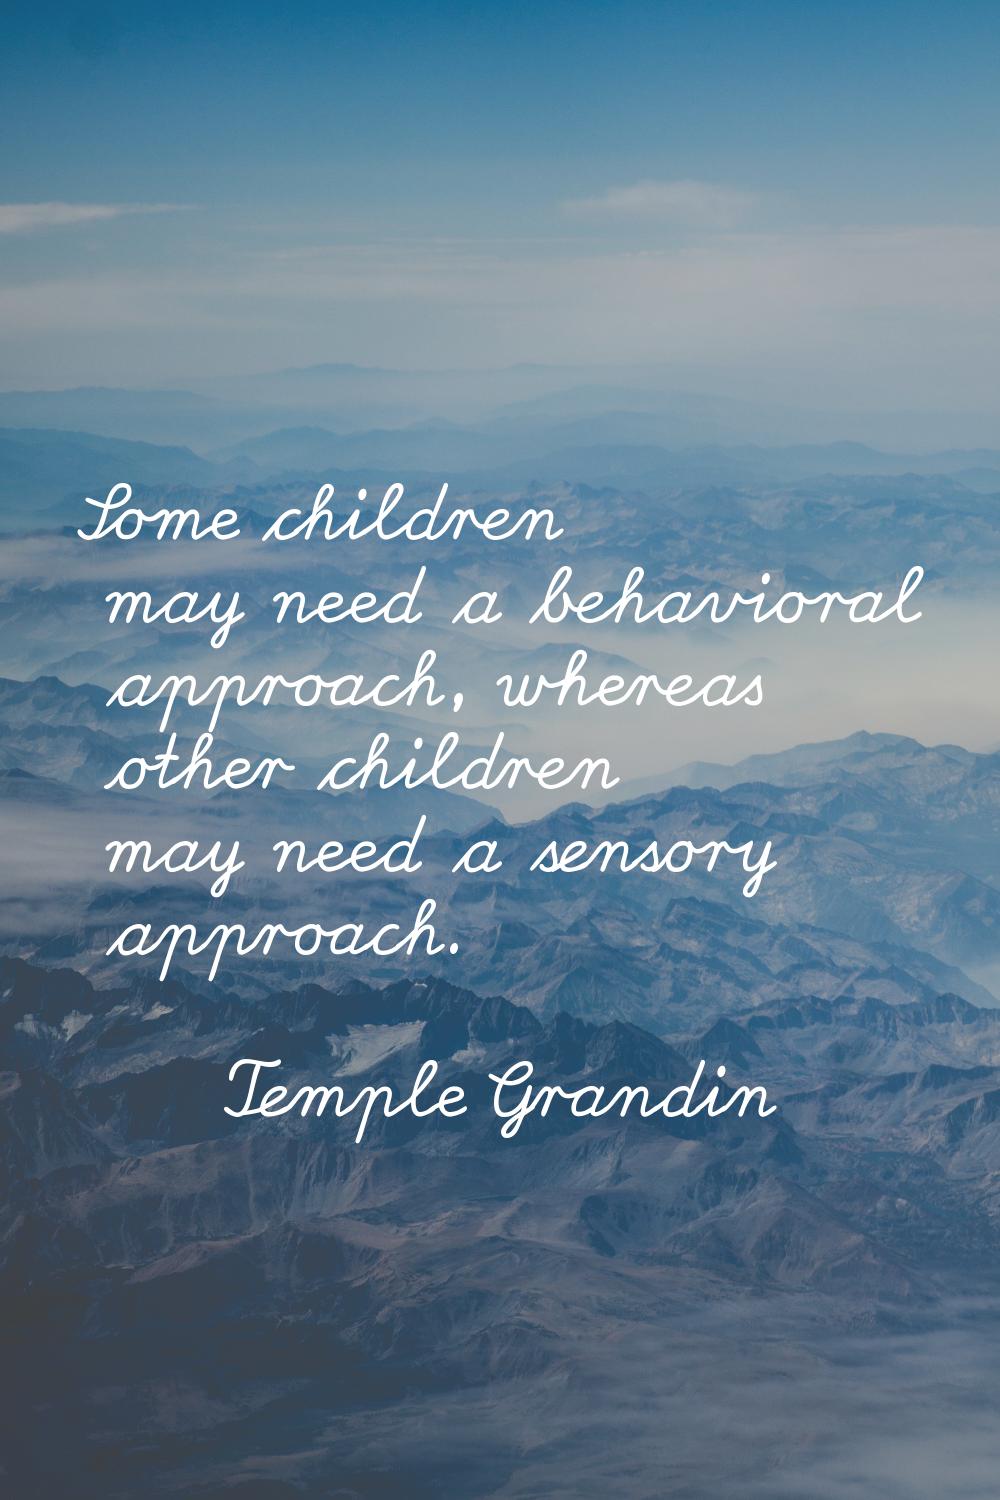 Some children may need a behavioral approach, whereas other children may need a sensory approach.